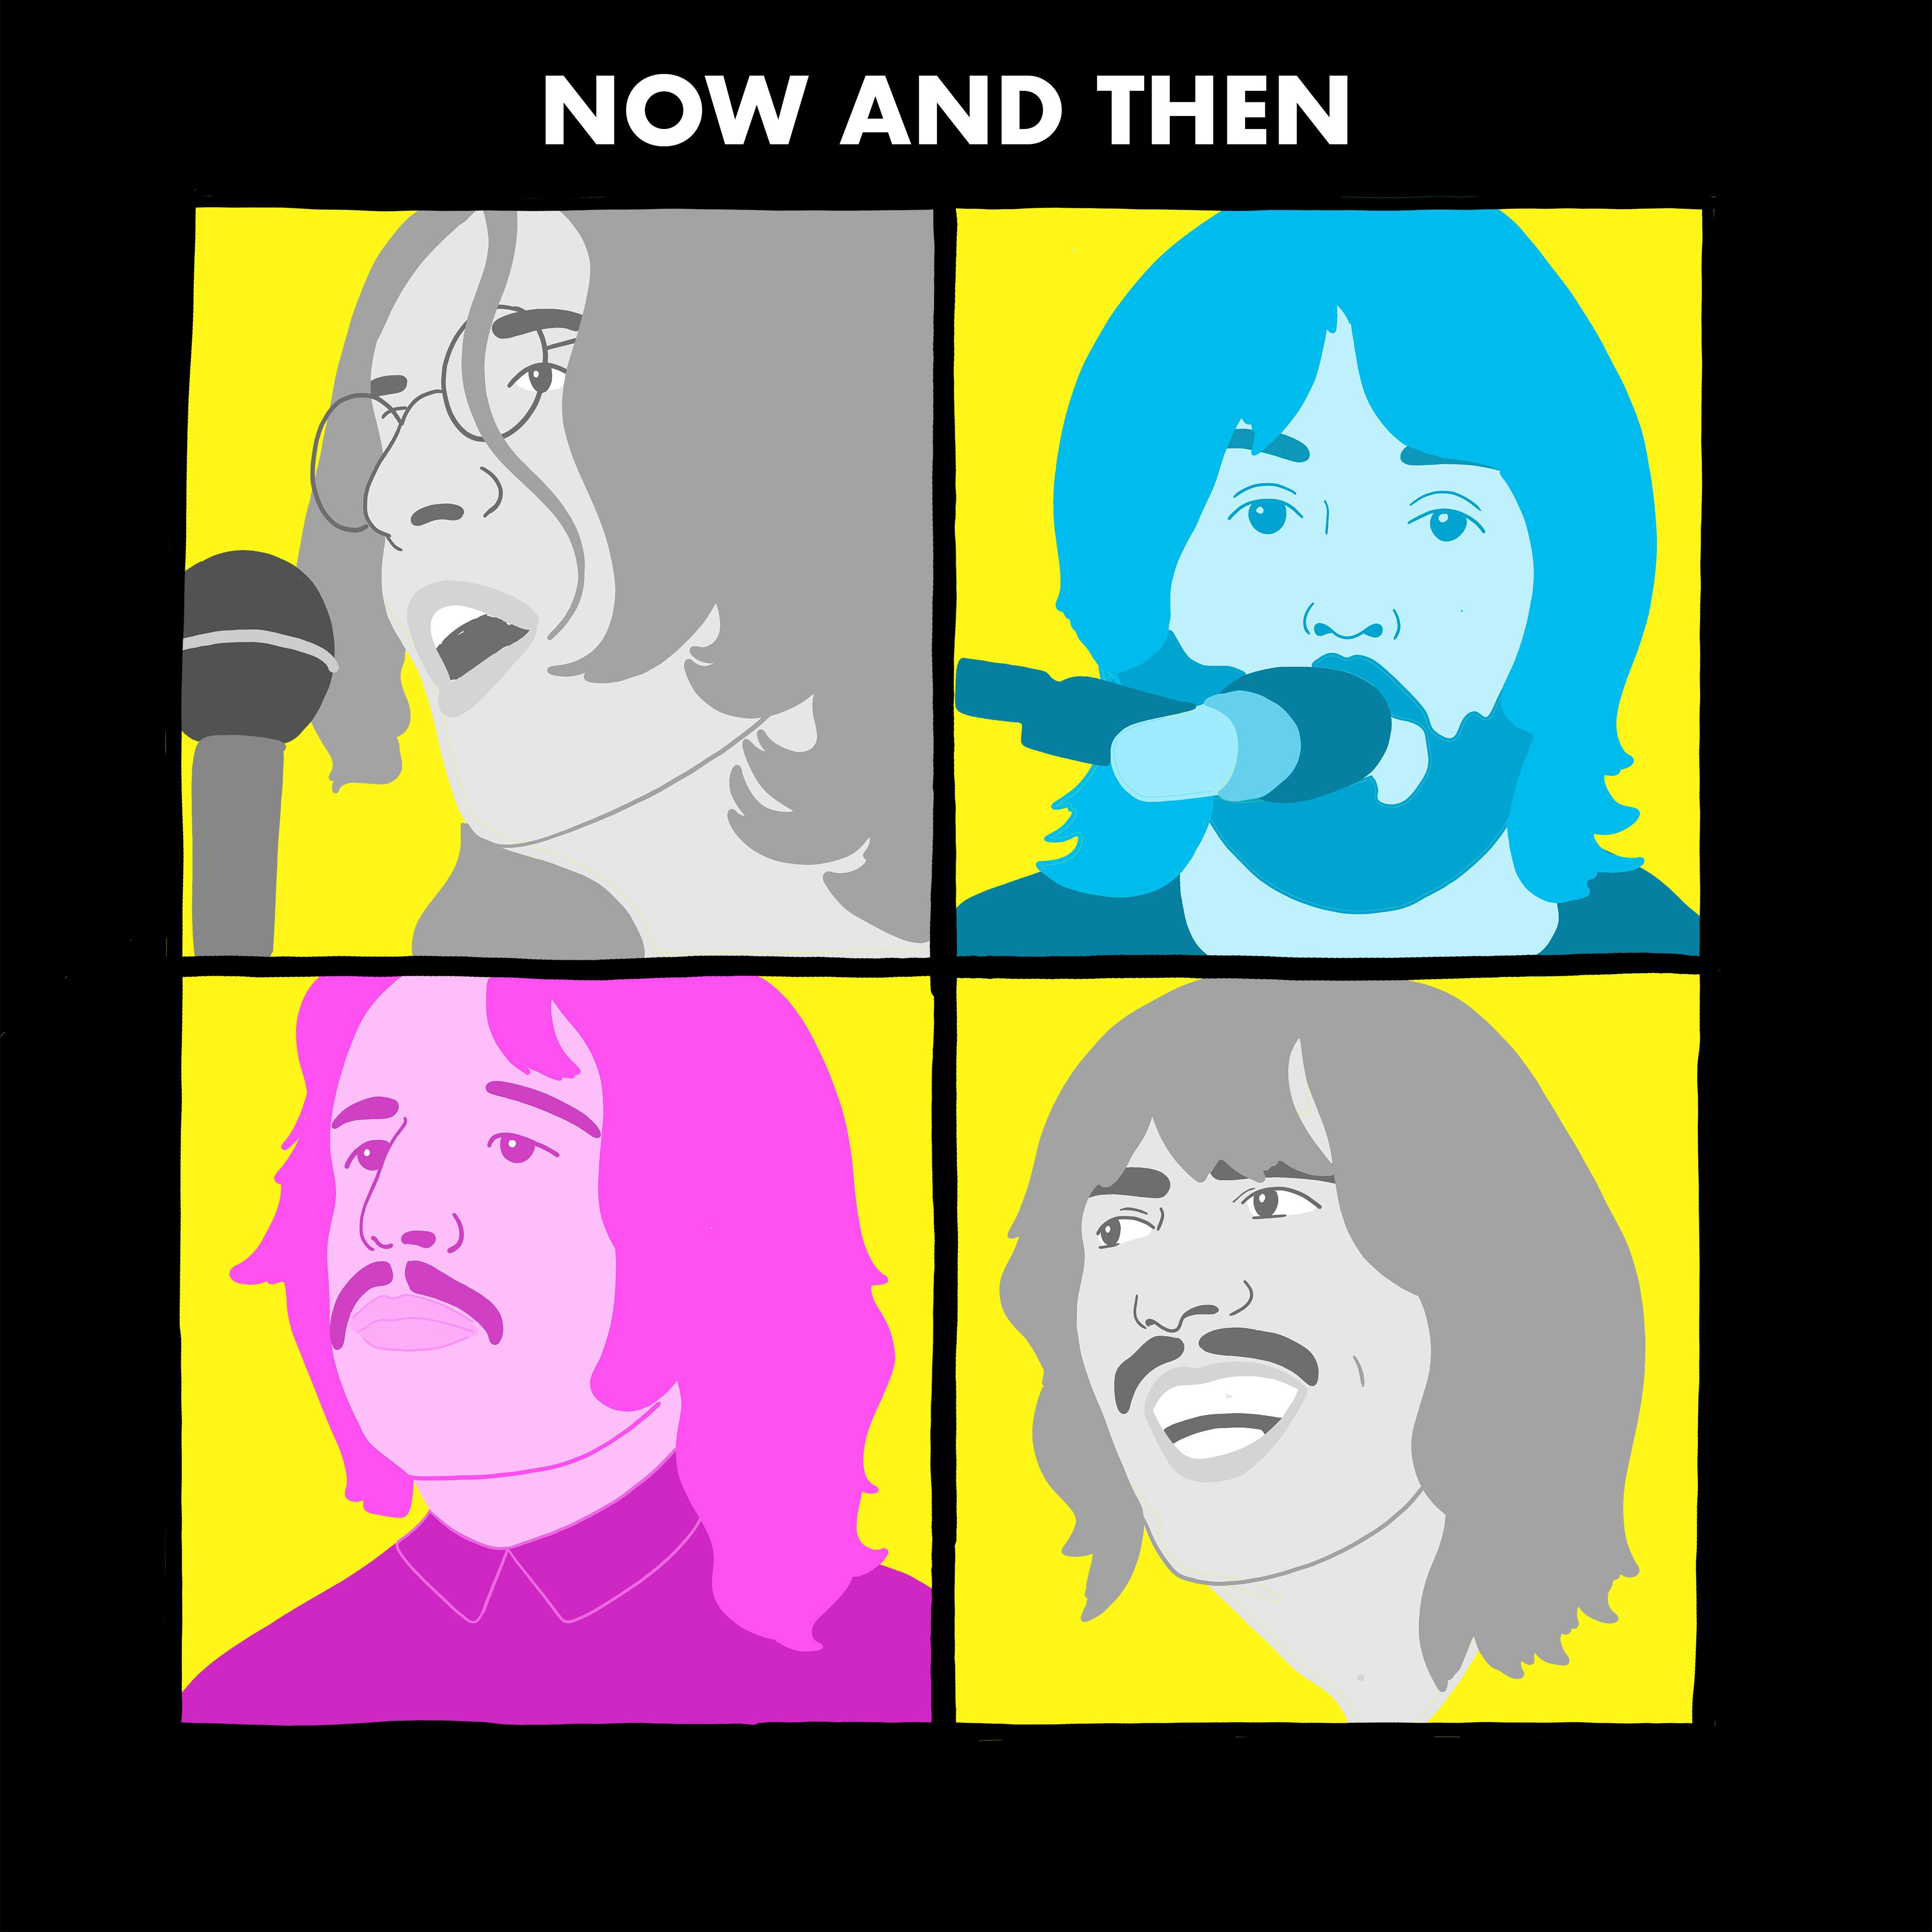 The Beatles: ”Now and Then” and Forever